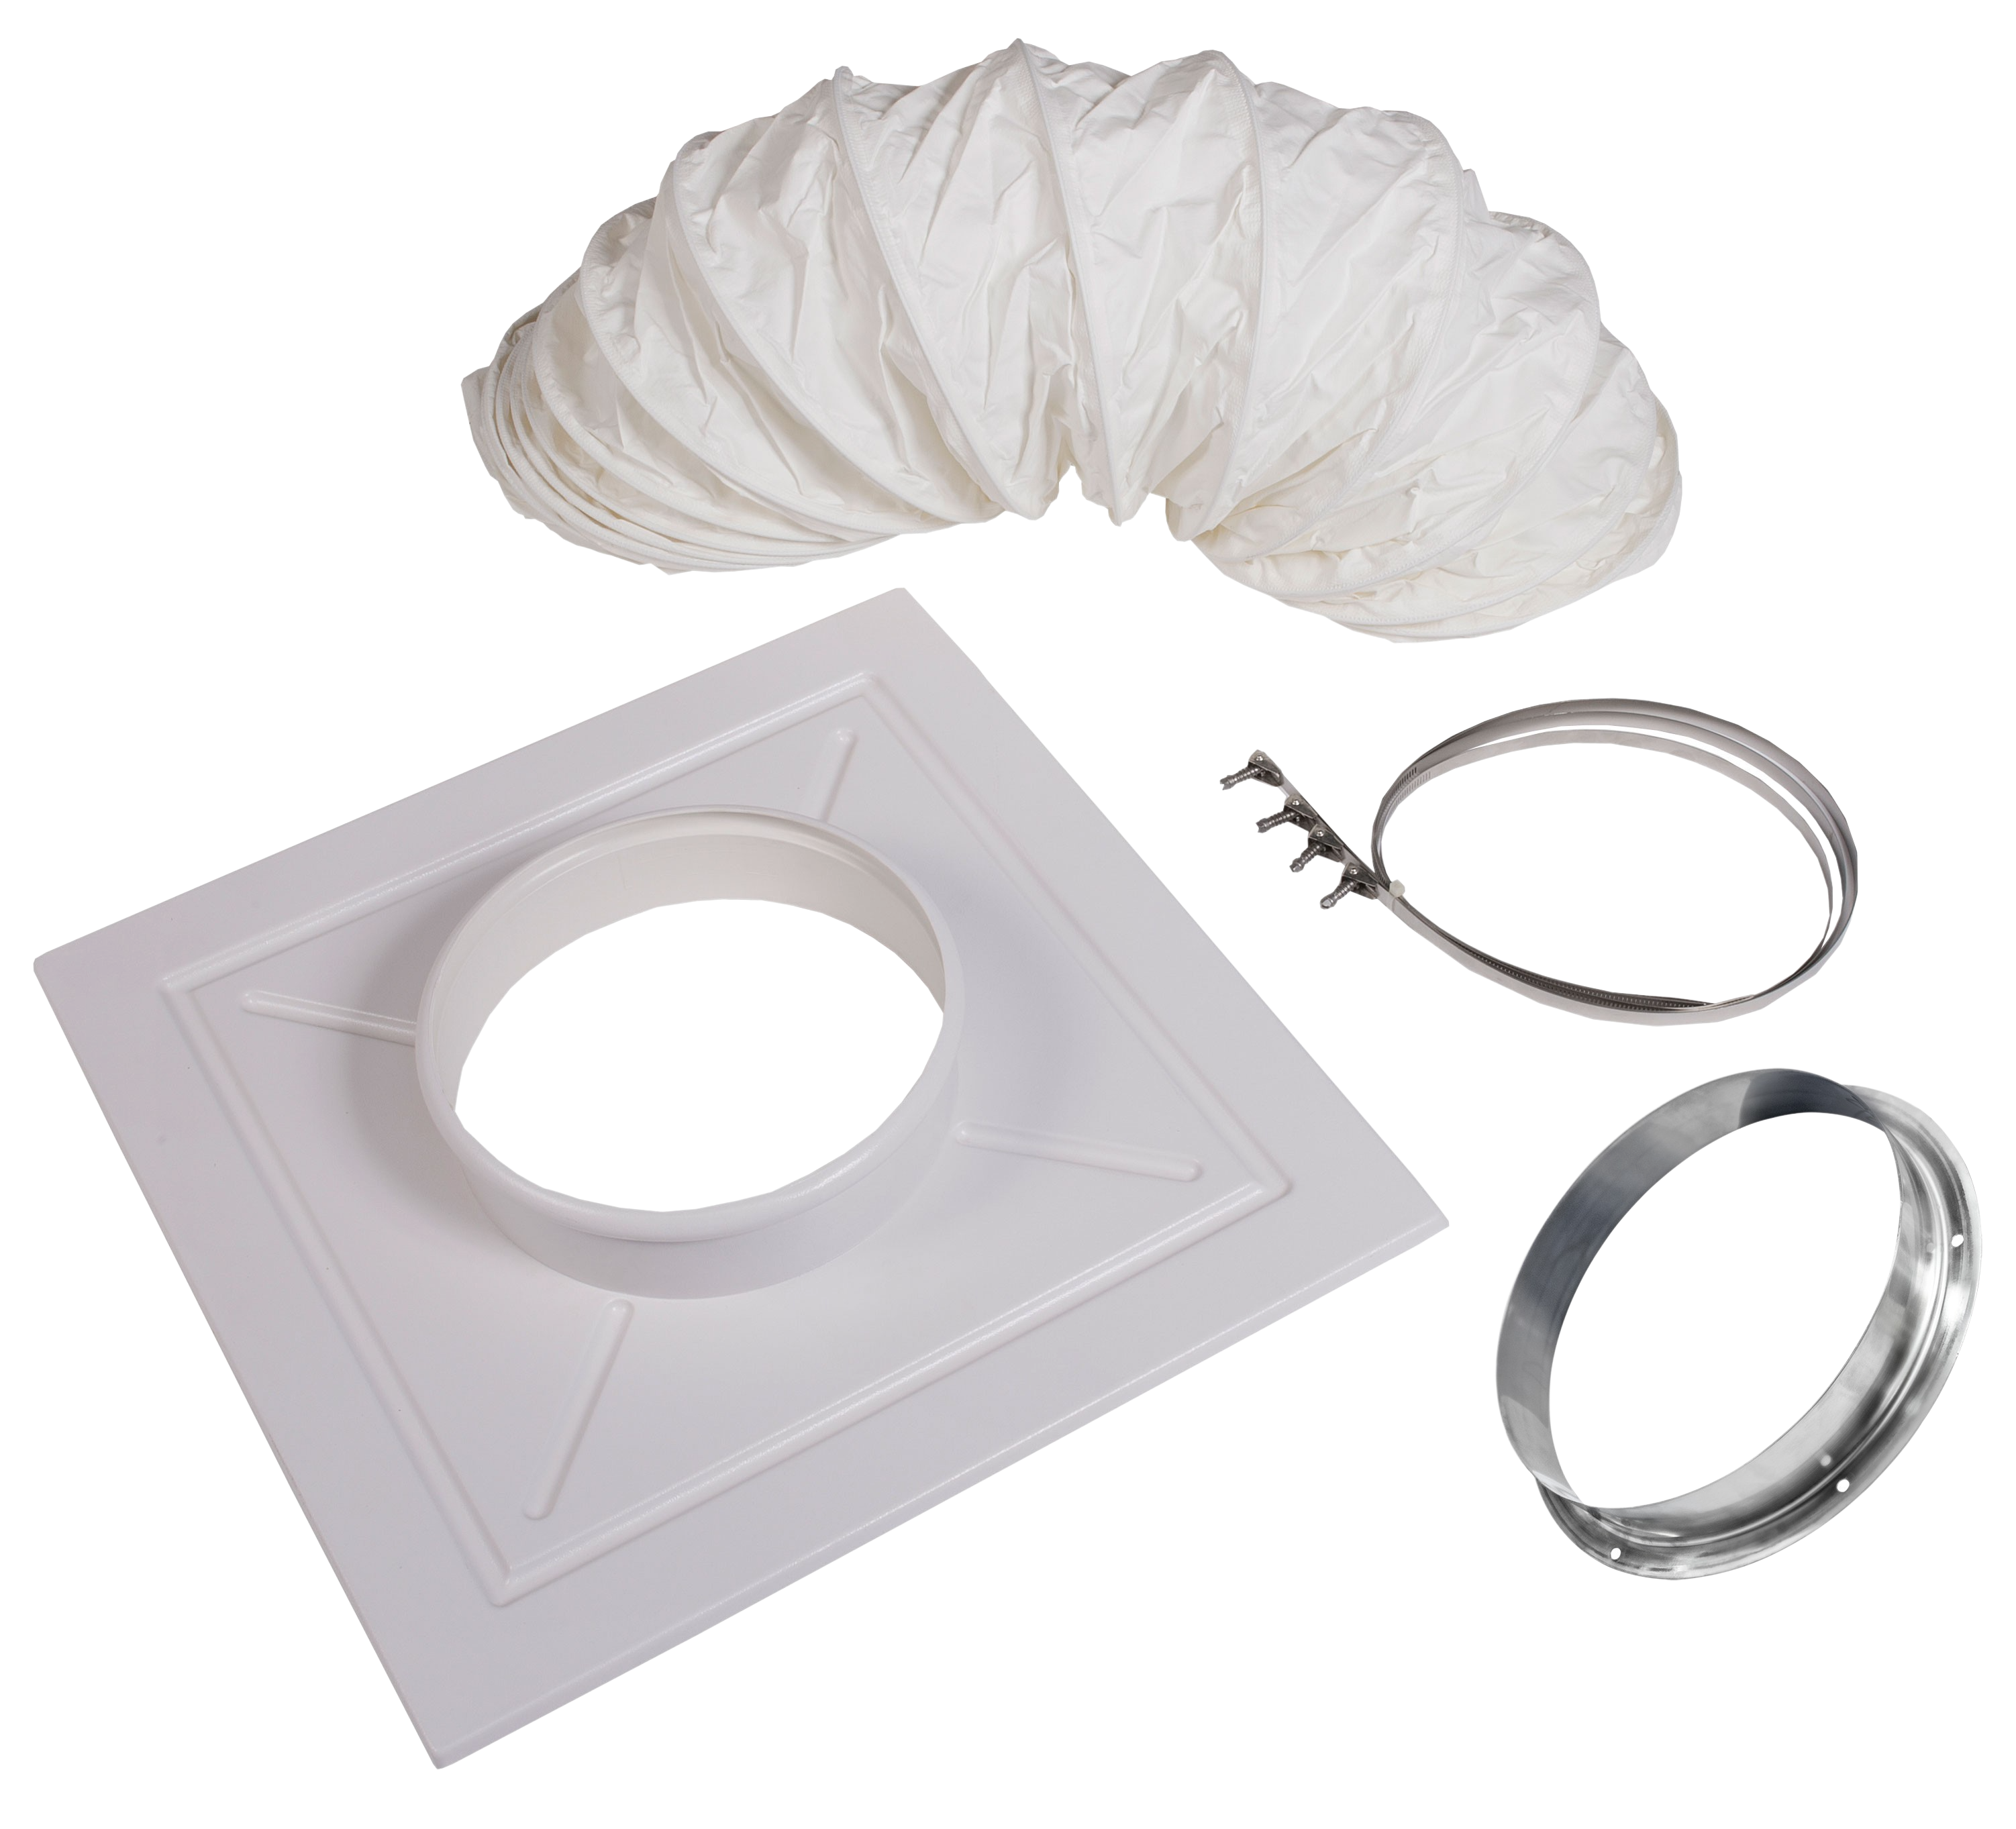 KwiKool, Kwikool CK-12S-SS Single Ceiling Duct Kit with Stainless Steel Flange New